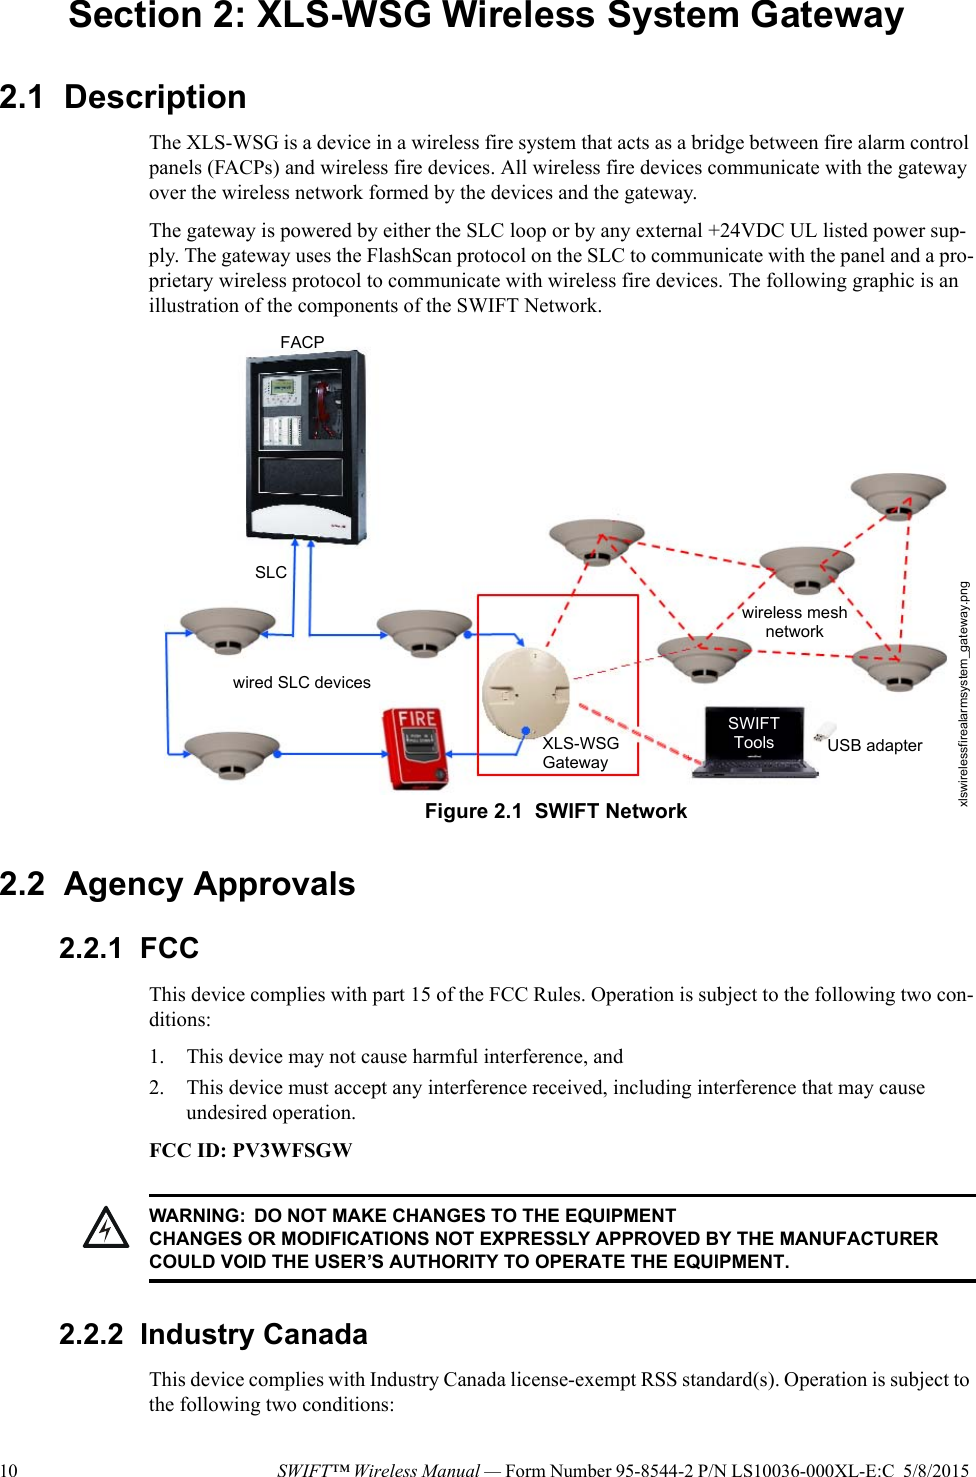 10 SWIFT™ Wireless Manual — Form Number 95-8544-2 P/N LS10036-000XL-E:C  5/8/2015 Section 2: XLS-WSG Wireless System Gateway2.1  DescriptionThe XLS-WSG is a device in a wireless fire system that acts as a bridge between fire alarm control panels (FACPs) and wireless fire devices. All wireless fire devices communicate with the gateway over the wireless network formed by the devices and the gateway. The gateway is powered by either the SLC loop or by any external +24VDC UL listed power sup-ply. The gateway uses the FlashScan protocol on the SLC to communicate with the panel and a pro-prietary wireless protocol to communicate with wireless fire devices. The following graphic is an illustration of the components of the SWIFT Network.    2.2  Agency Approvals2.2.1  FCCThis device complies with part 15 of the FCC Rules. Operation is subject to the following two con-ditions: 1. This device may not cause harmful interference, and 2. This device must accept any interference received, including interference that may cause undesired operation.FCC ID: PV3WFSGW2.2.2  Industry CanadaThis device complies with Industry Canada license-exempt RSS standard(s). Operation is subject to the following two conditions: Figure 2.1  SWIFT NetworkFACPSLCwired SLC devicesXLS-WSGGatewaywireless mesh networkSWIFTToolsxlswirelessfirealarmsystem_gateway.pngUSB adapter!WARNING: DO NOT MAKE CHANGES TO THE EQUIPMENTCHANGES OR MODIFICATIONS NOT EXPRESSLY APPROVED BY THE MANUFACTURER COULD VOID THE USER’S AUTHORITY TO OPERATE THE EQUIPMENT.